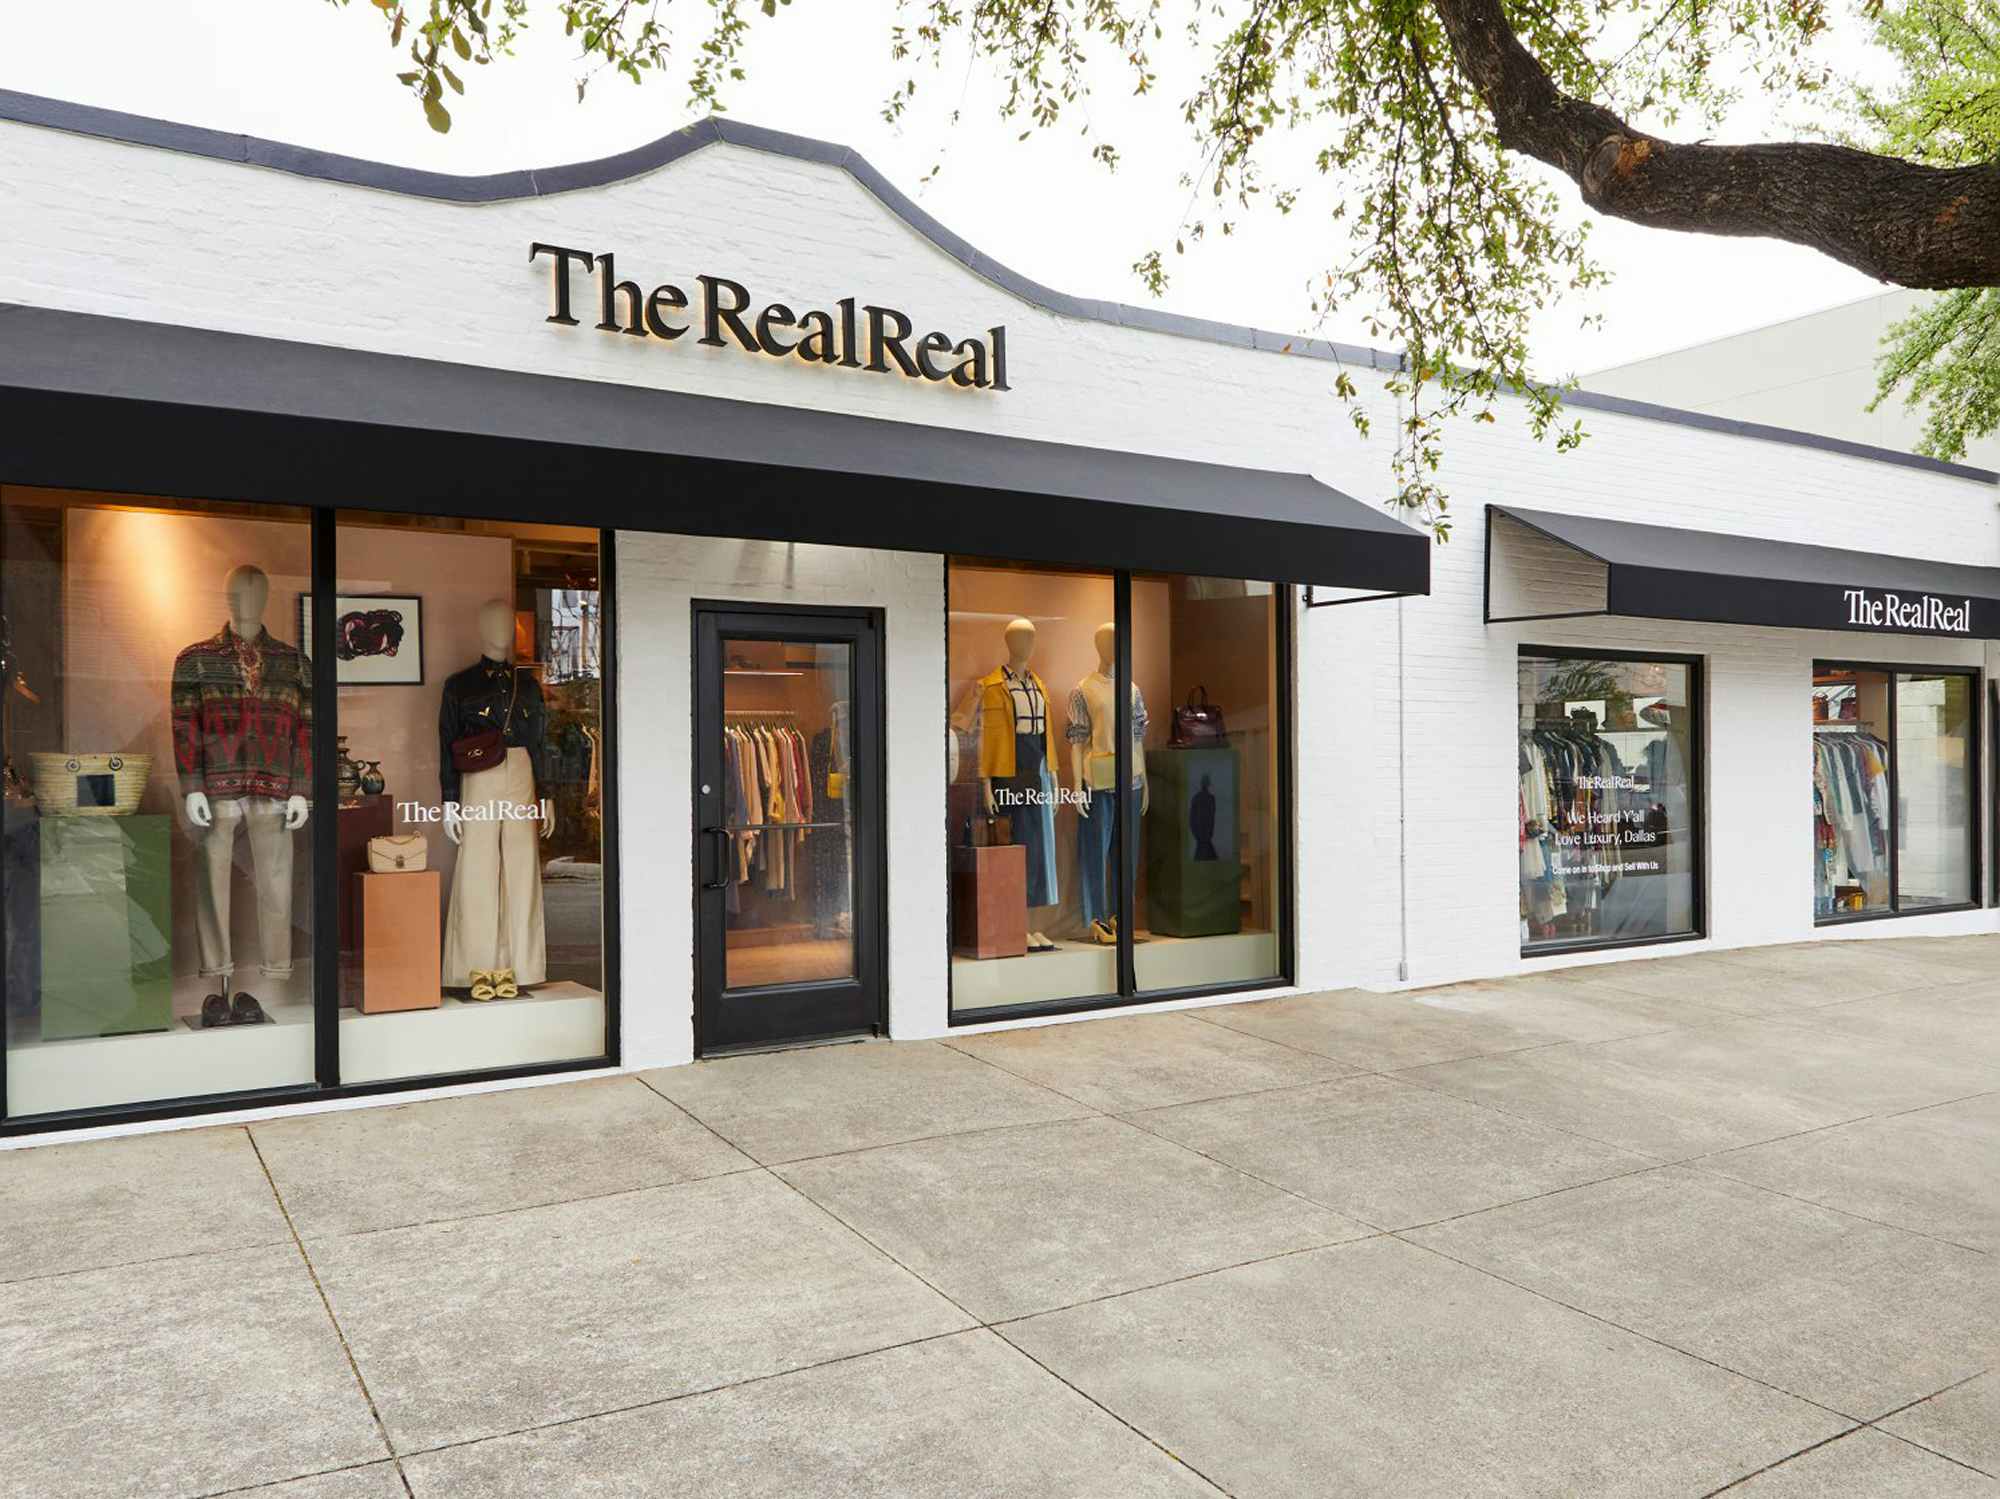 the exterior of the real real store